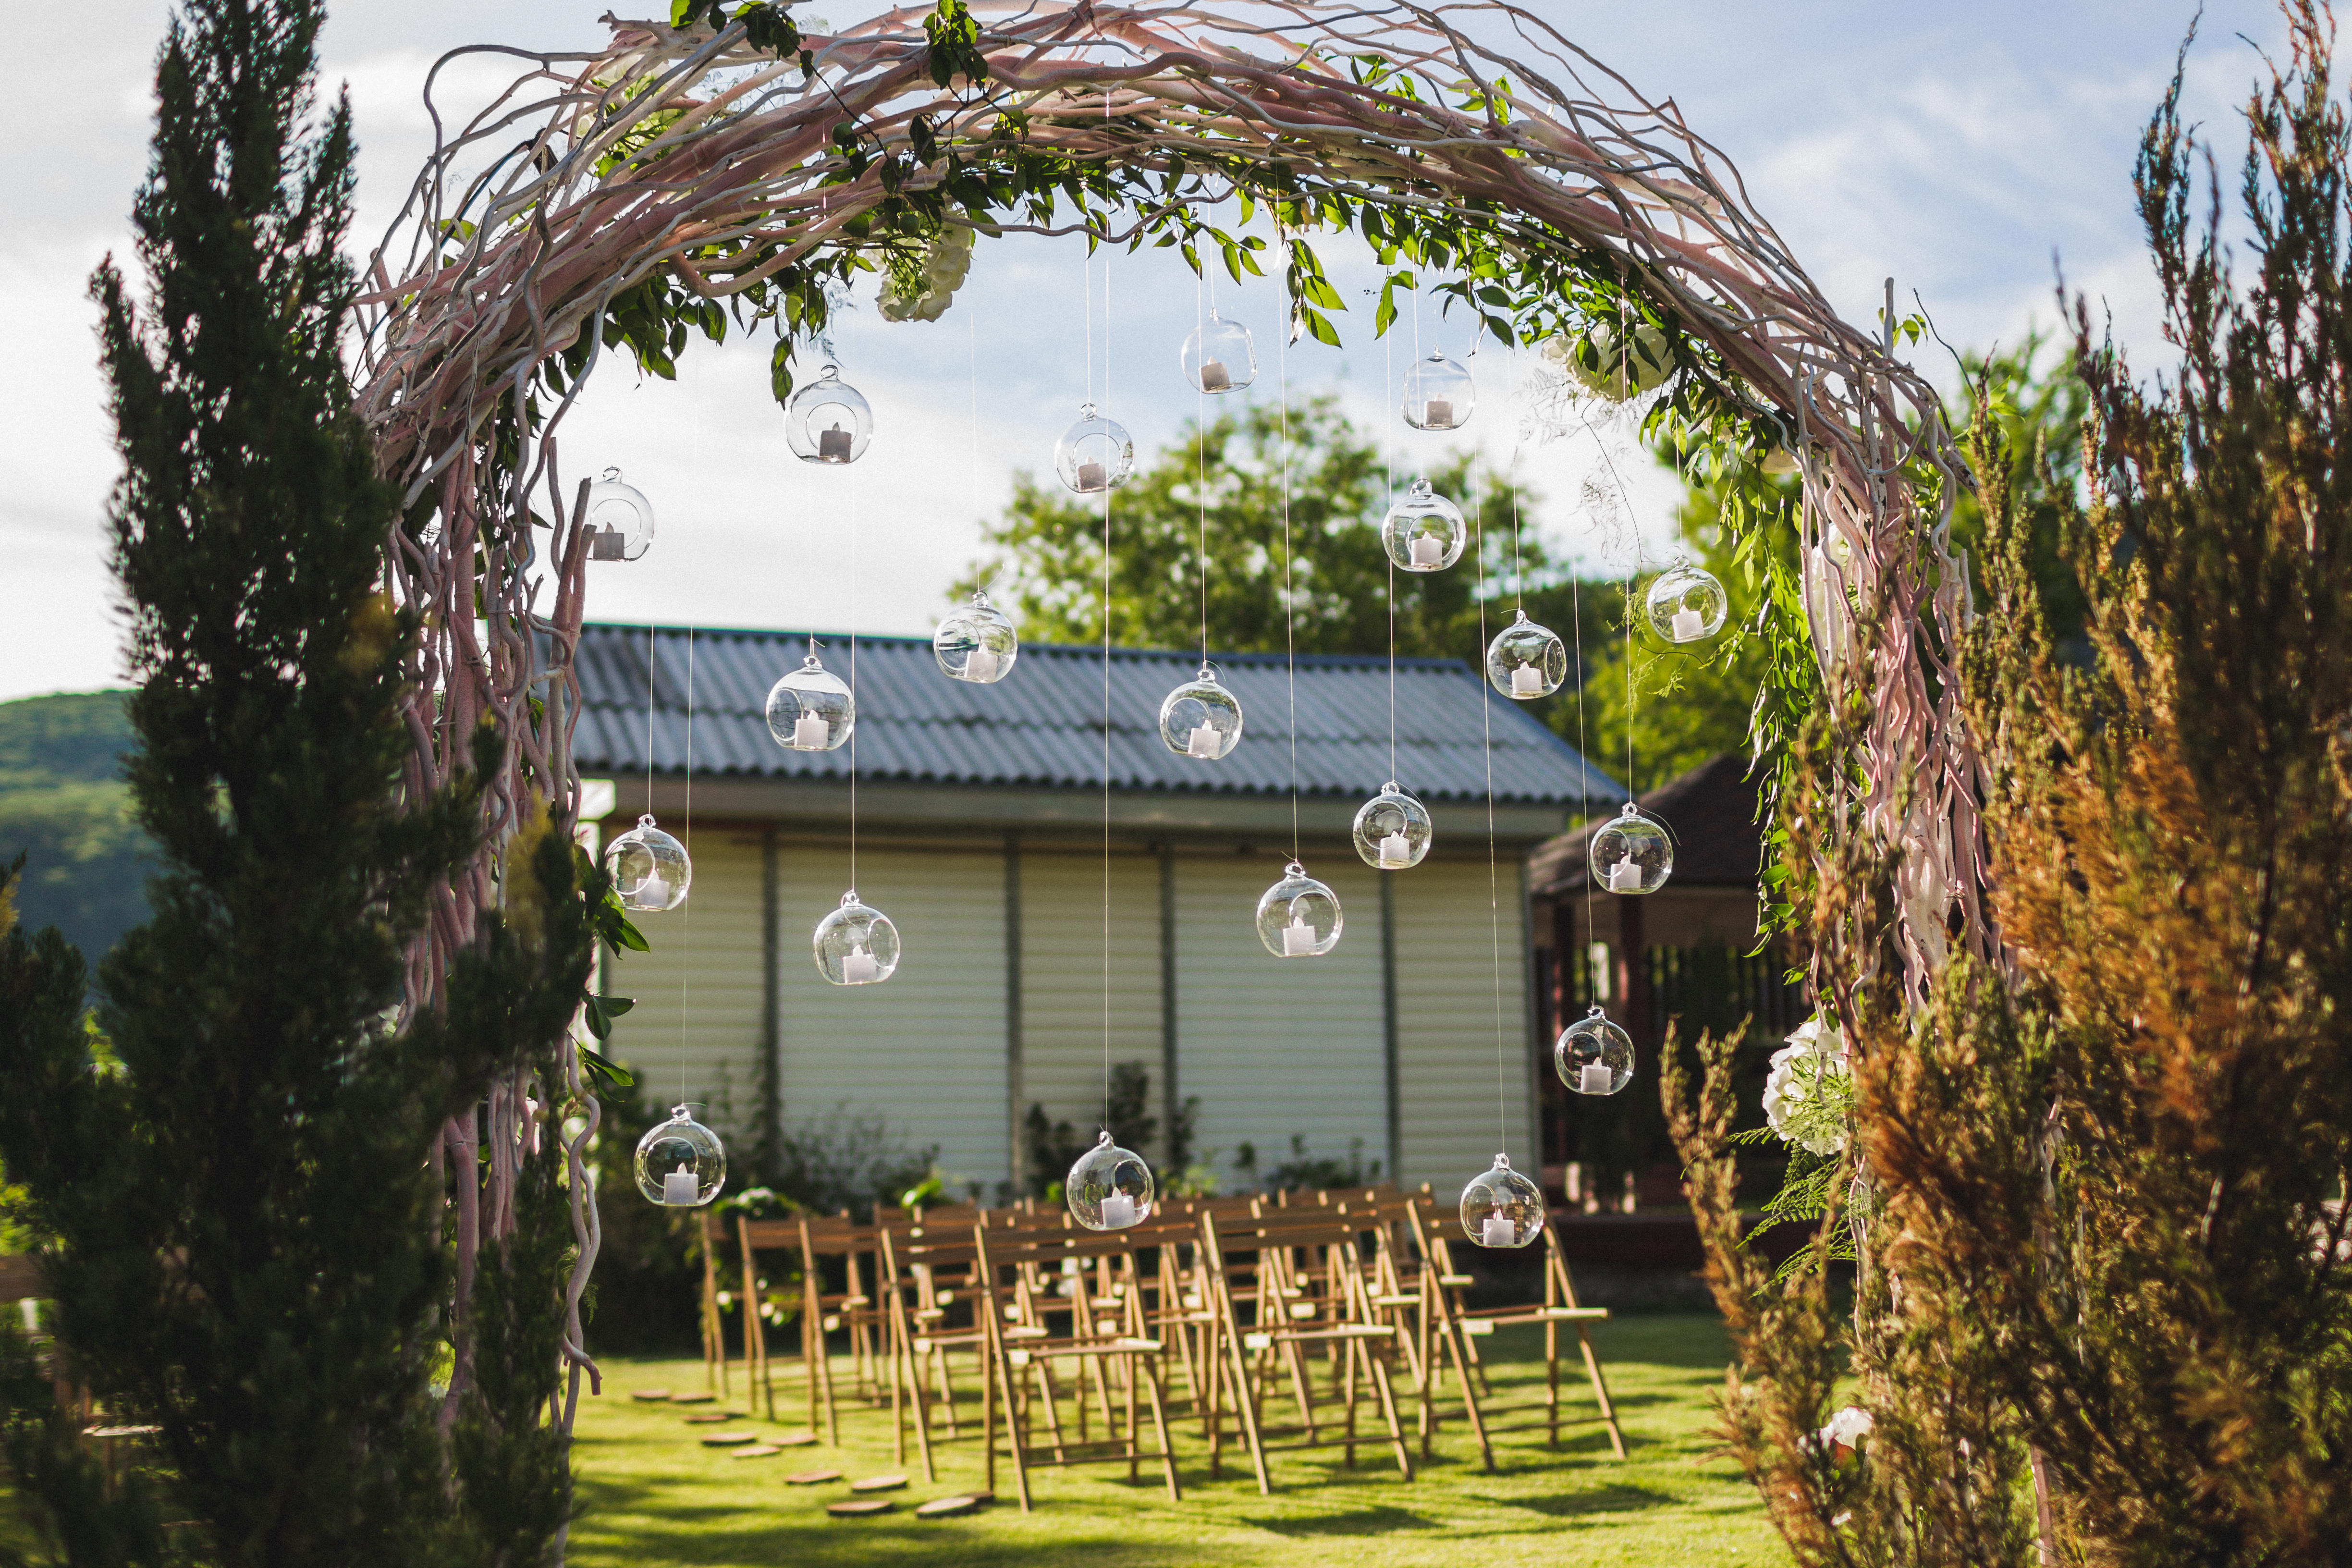 Evening wedding ceremony in garden, arch with white branches, brown wooden chairs